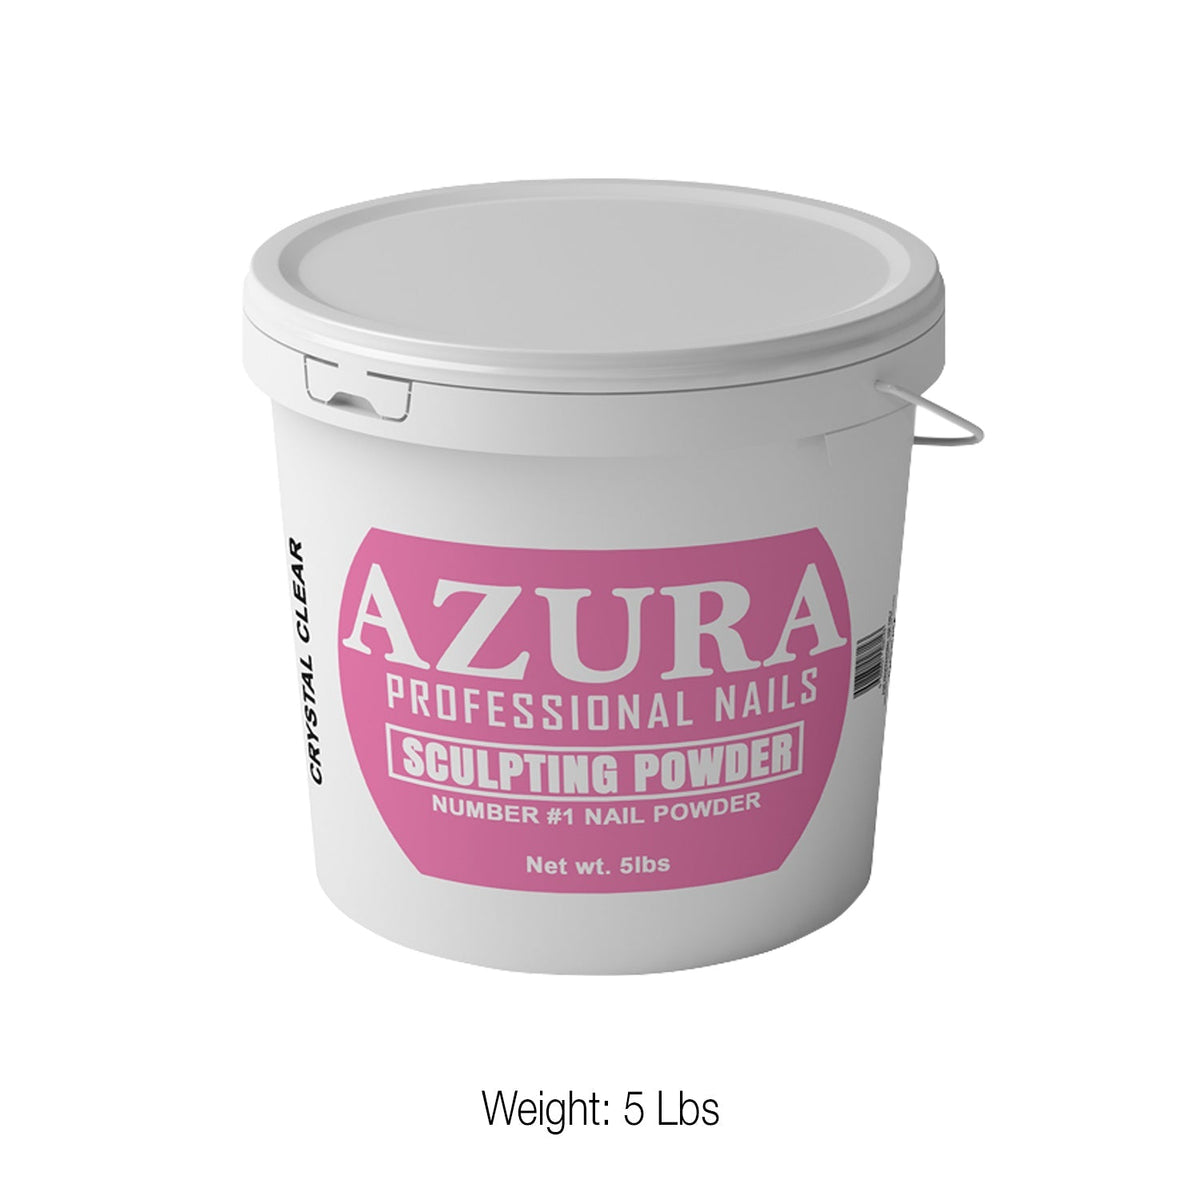 AZURA Sculpting Powder (5lbs) - (Natural Mix / Crystal Clear / Ombre White)-powder-Nails Deal & Beauty Supply-CRYSTAL CLEAR- Nail Supply American Gel Polish - Phuong Ni